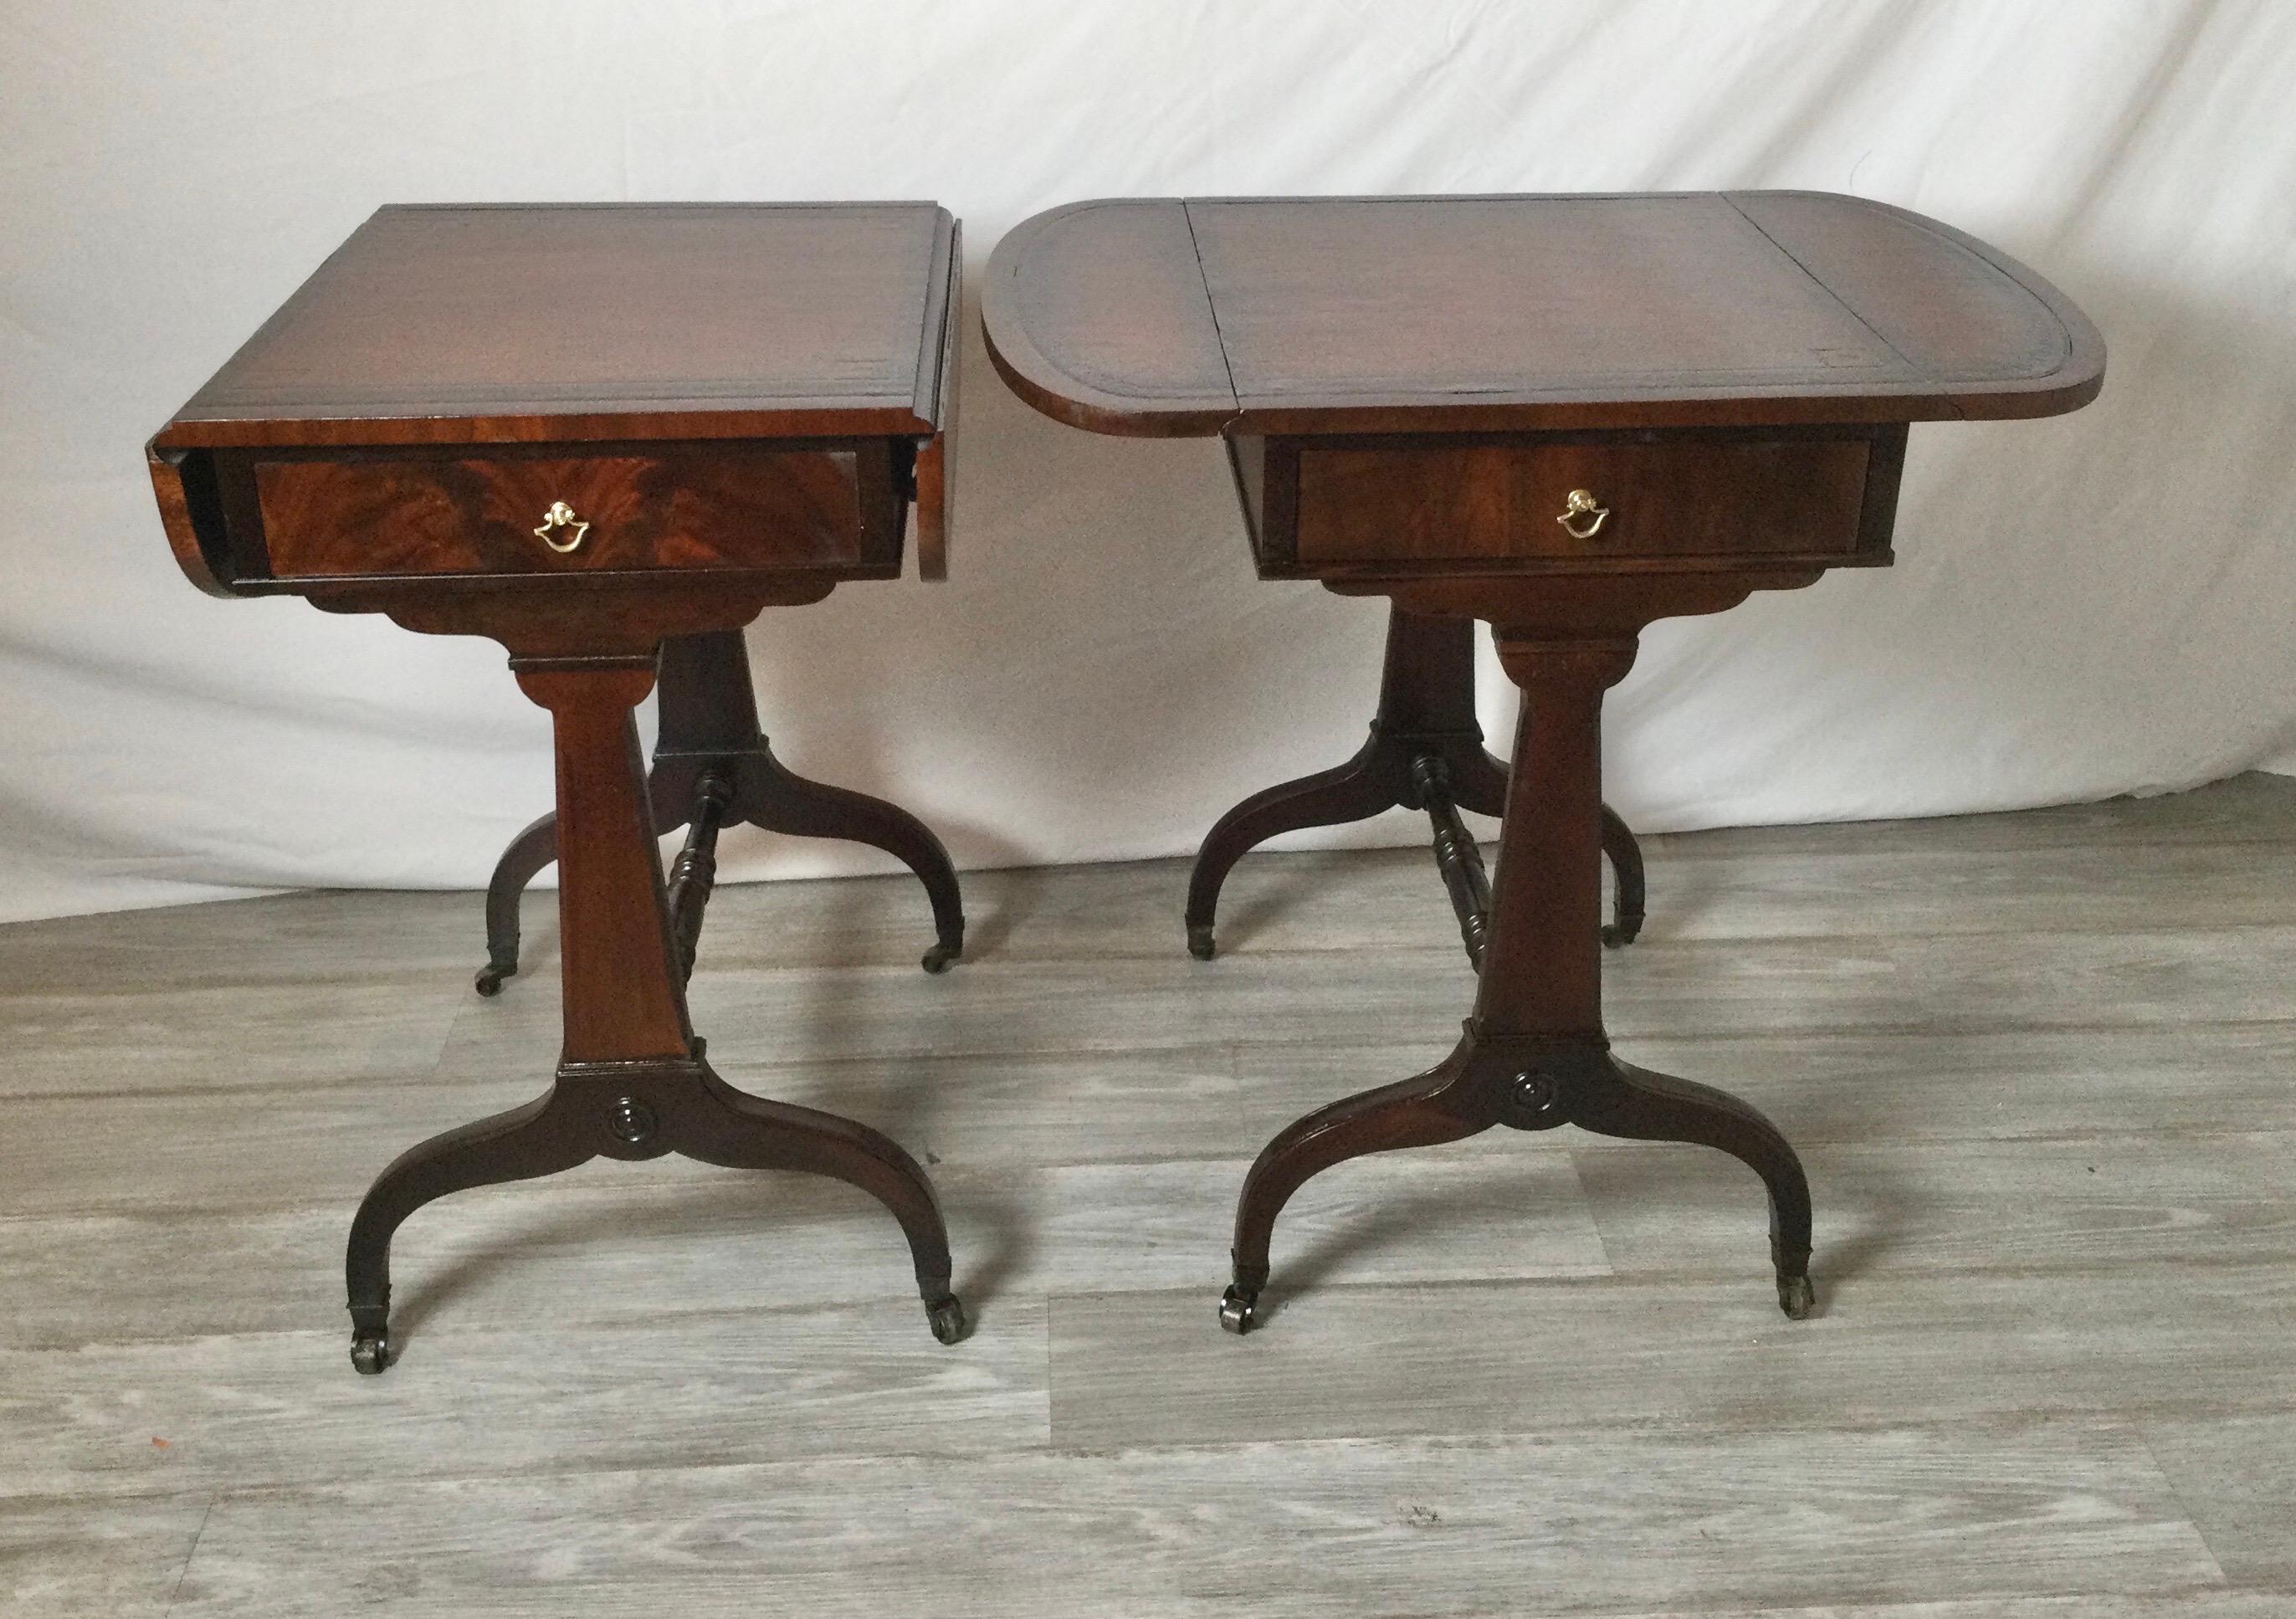 A pair of smaller Hepplewhite style flame mahogany side tables with leather tops. The finish has been refreshed and touched up with a French polish. The tables open are 27.5 wide, closed 17 inches. 20 inches deep, 26 inches tall.